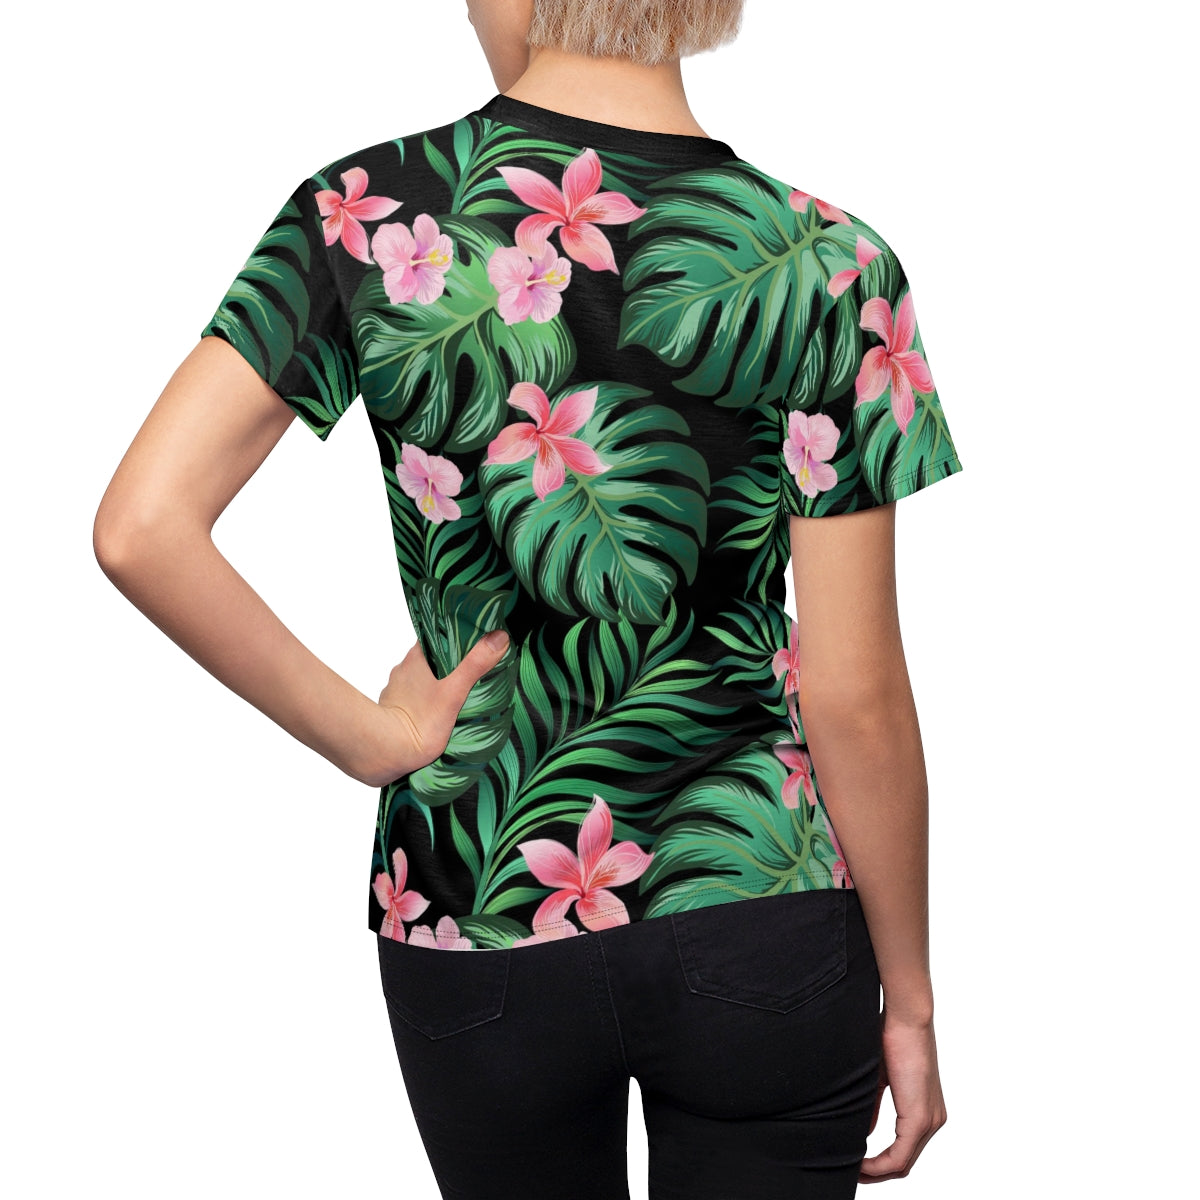 Summer Palm Leaves And Flowers Women's Tee